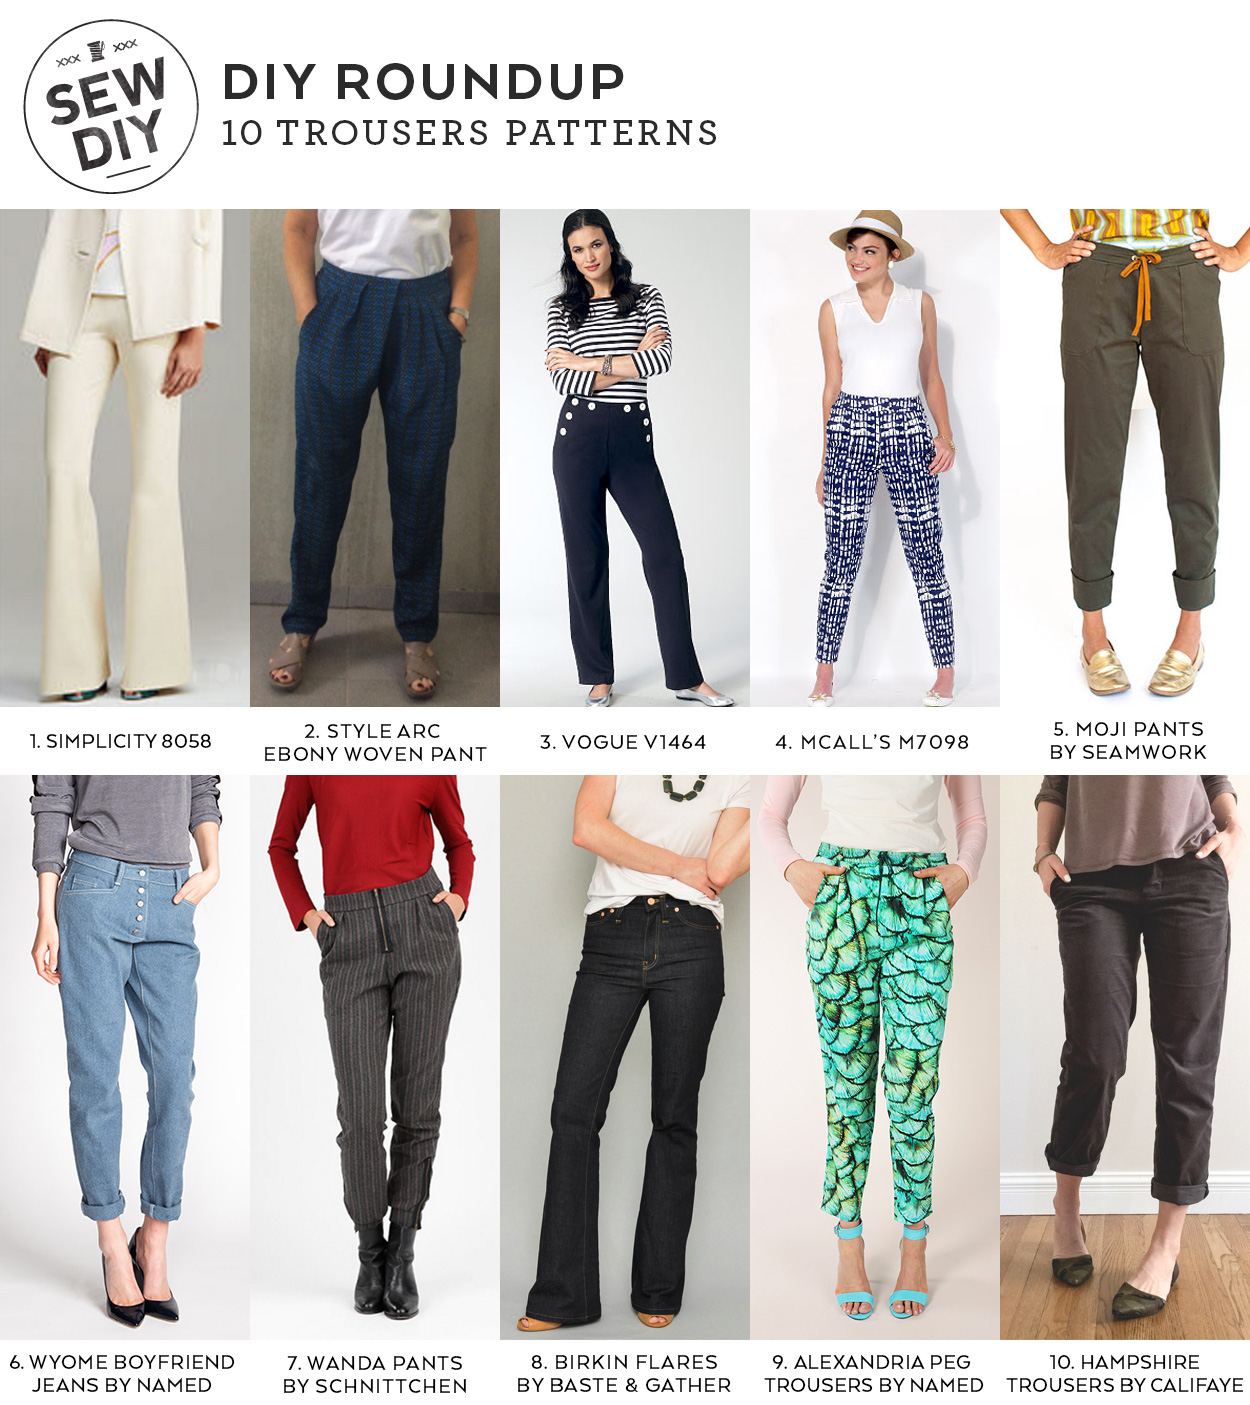 DIY Roundup – 10 Trousers Sewing Patterns for Spring — Sew DIY